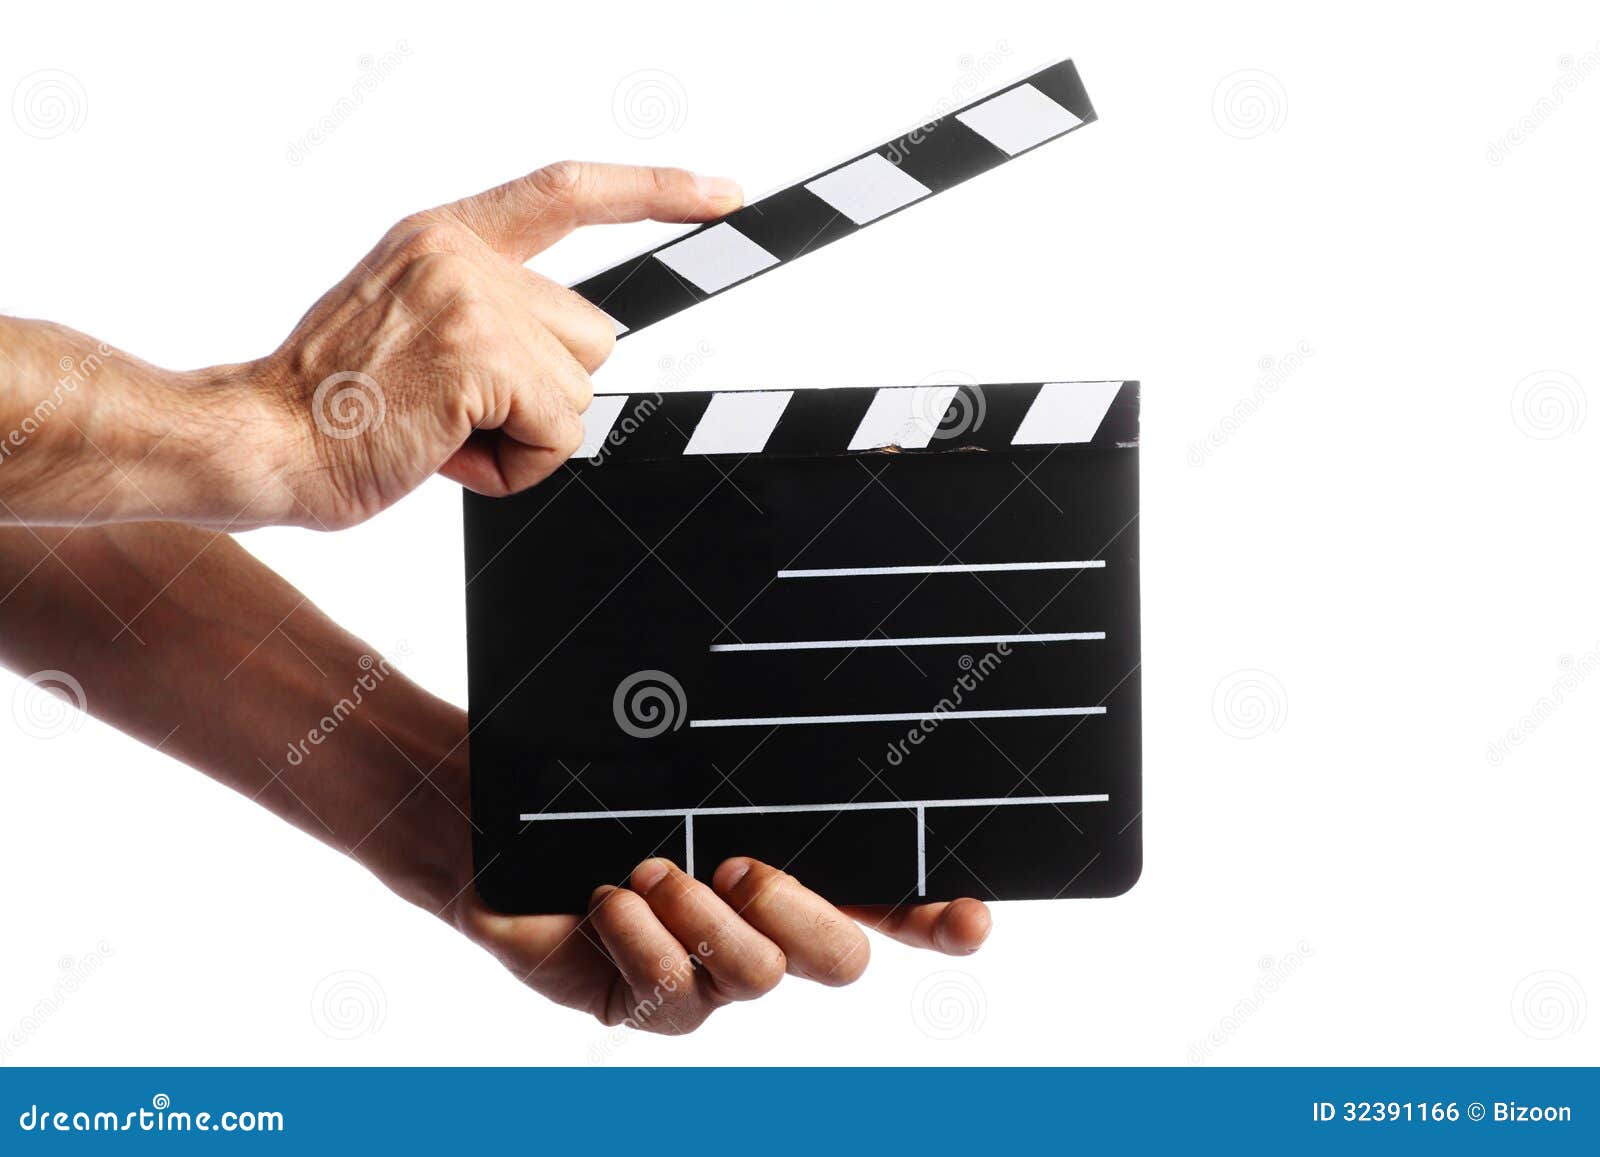 Cinema clap stock photo. Image of director, acting, motion - 32391166